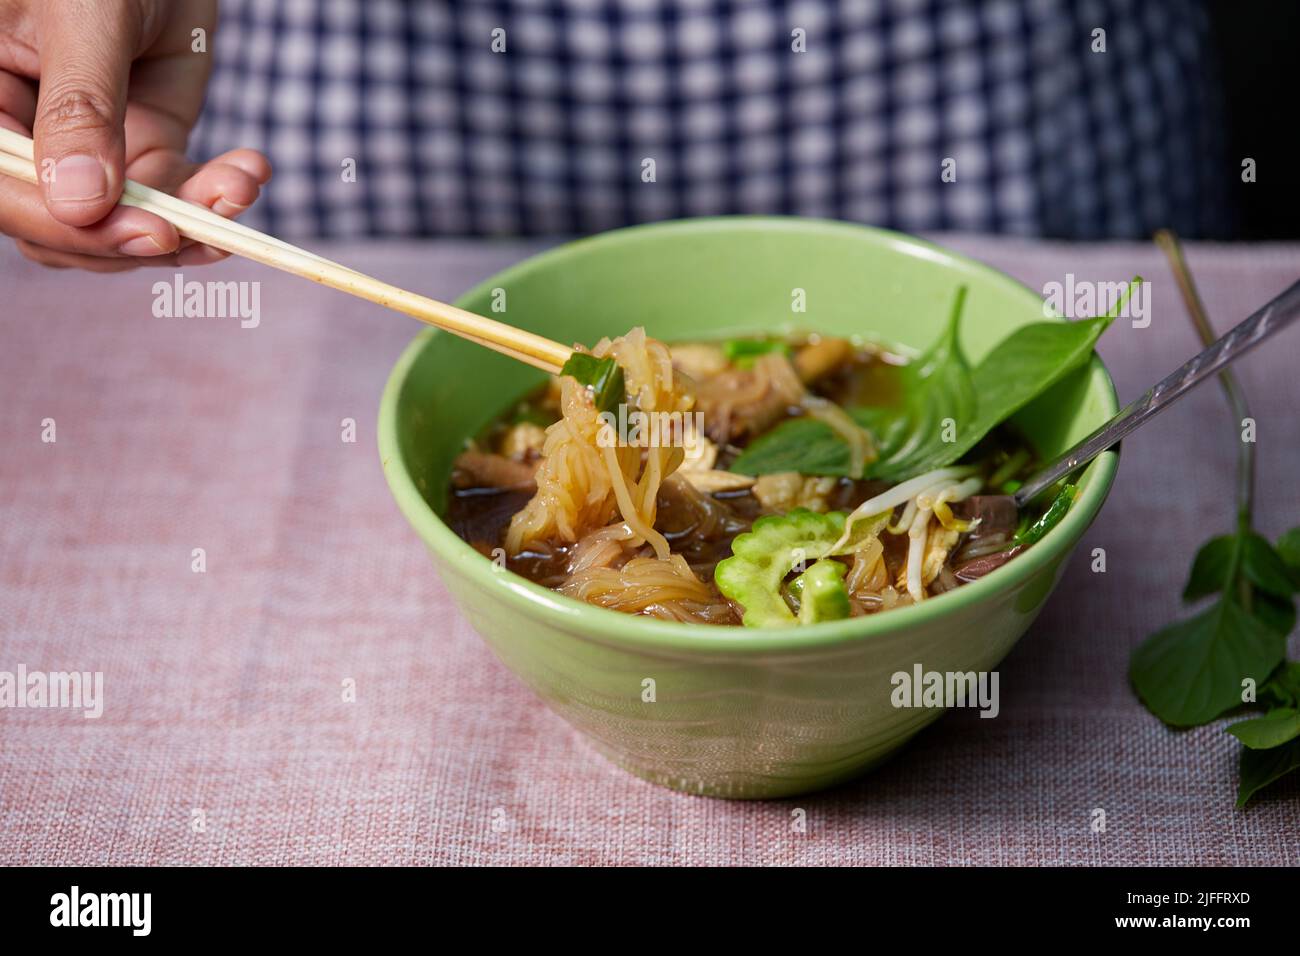 woman hand uses chopsticks to pickup rice stick noodles on table Stock Photo